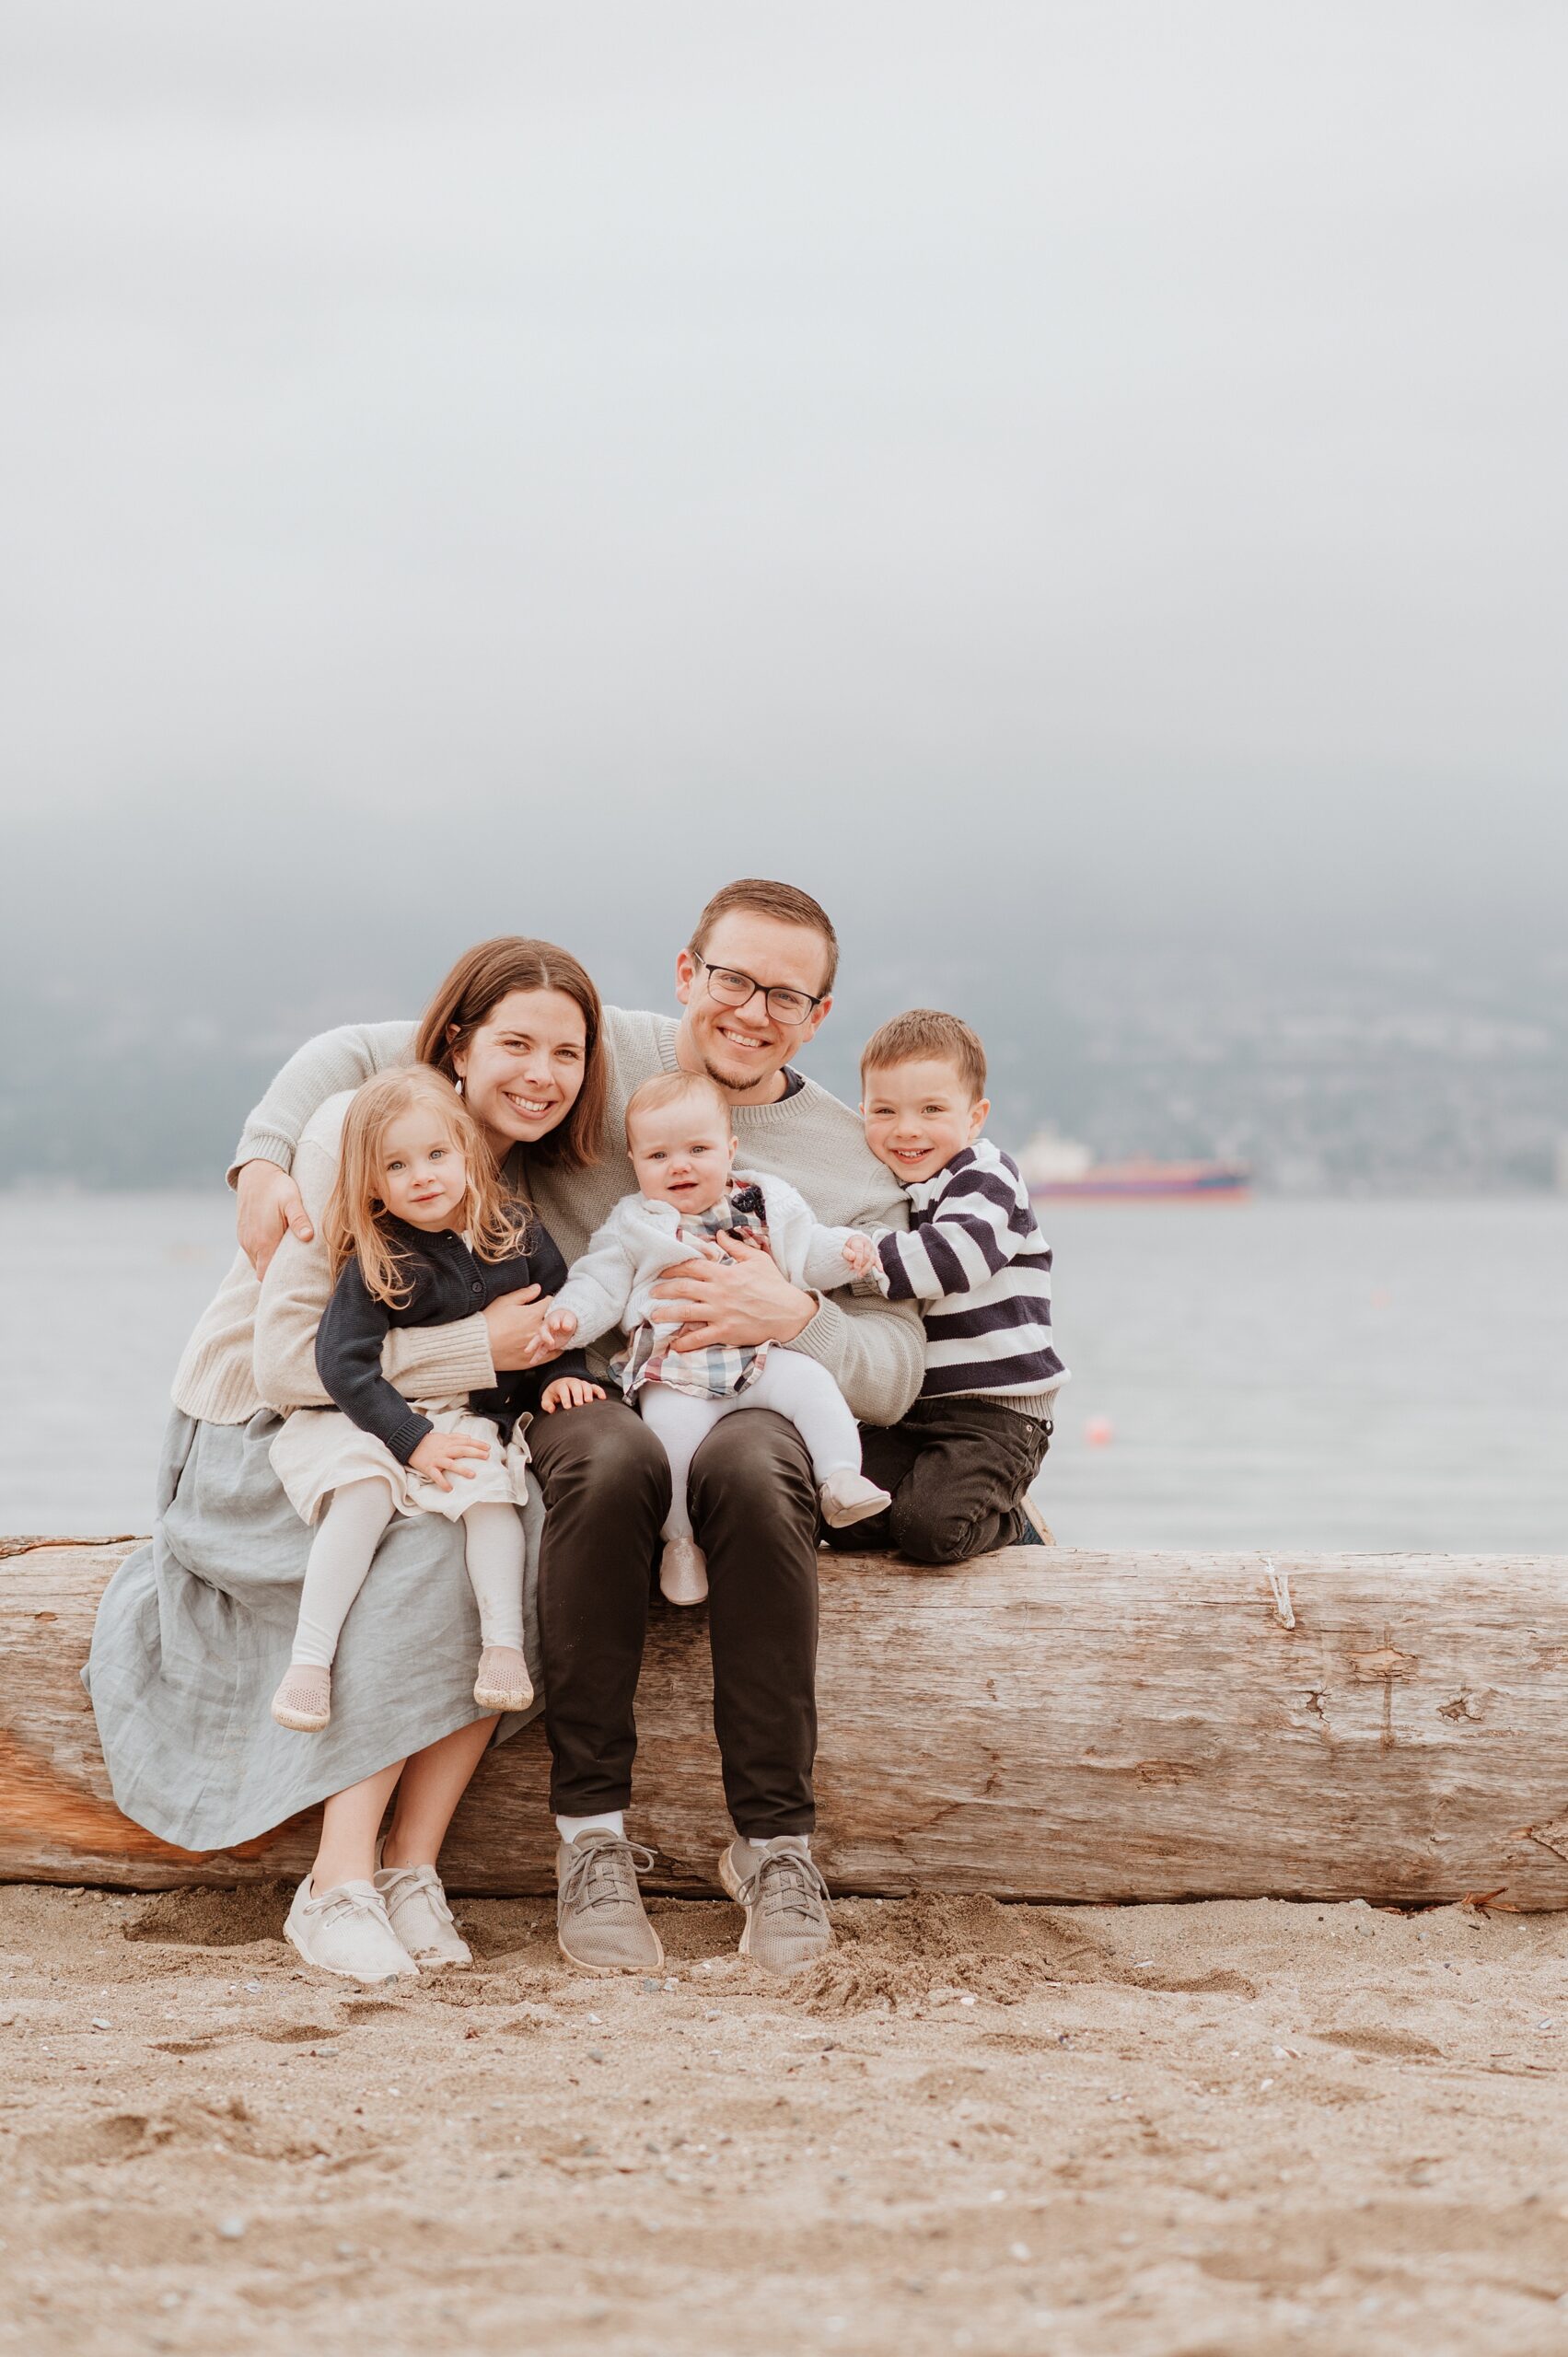 A mom and dad sit on a piece of driftwood on a beach with their three toddler children before visiting an indoor playground vancouver